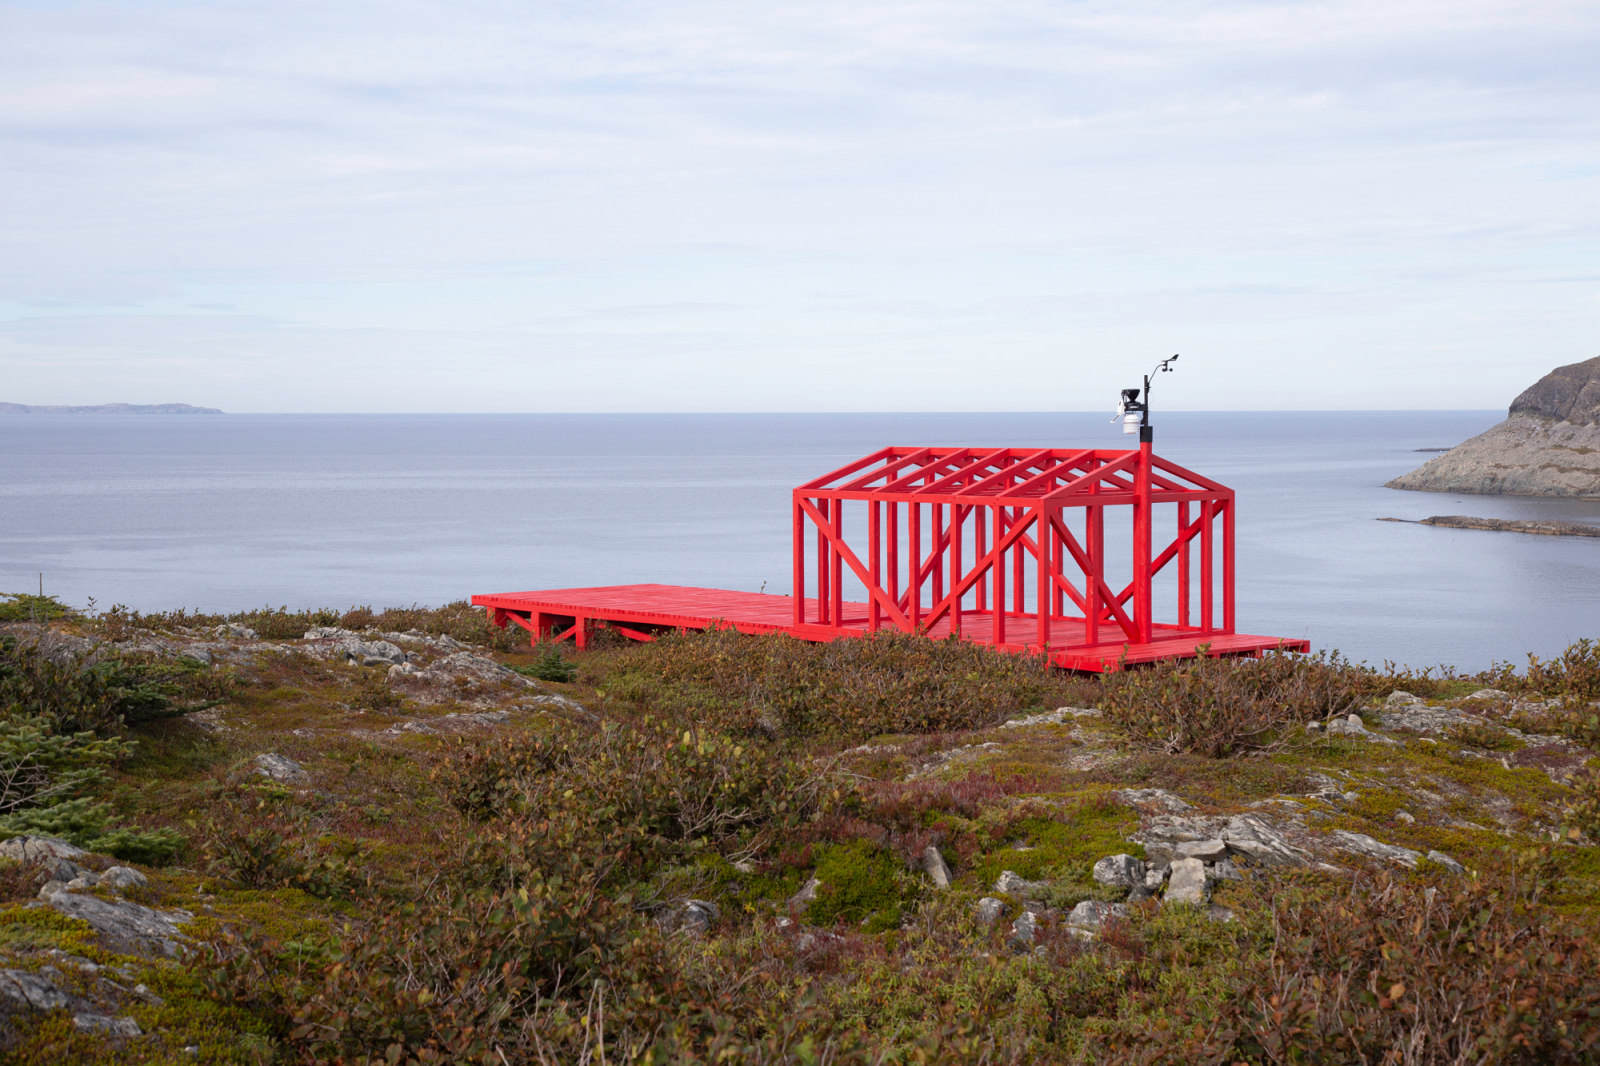 <div class="image_caption_container"><div class="image_caption"><p>Liam Gillick, <strong>A Variability Quantifier (aka The Fogo Island Red Weather Station)</strong>, Fogo Island, 2022. Photo © Joshua Jensen</p></div></div>